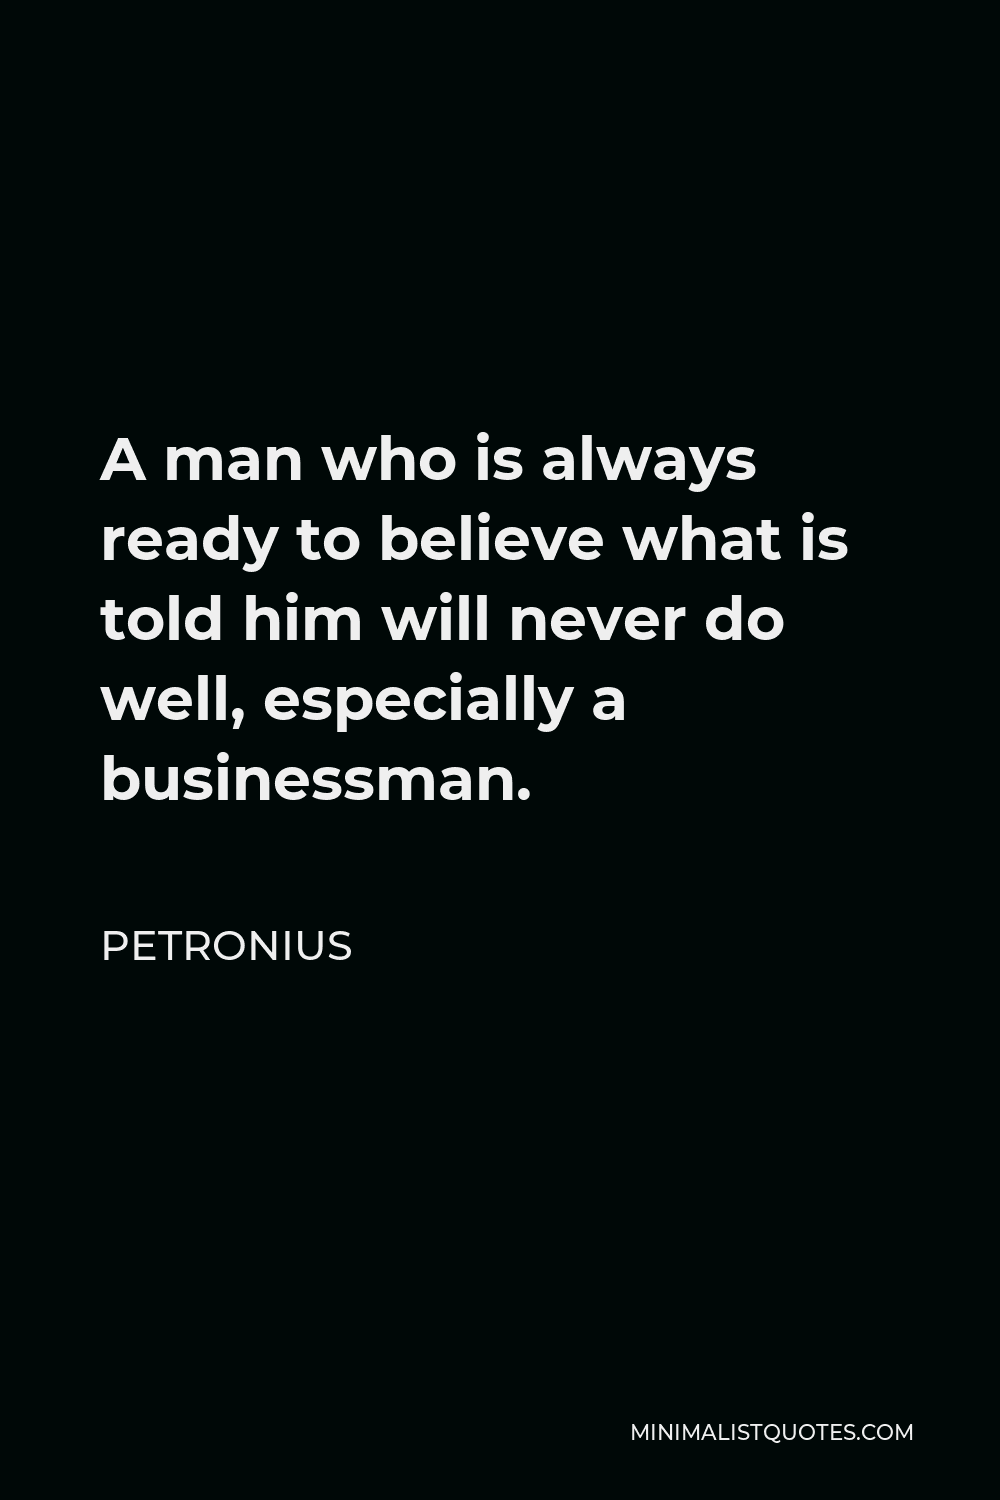 Petronius Quote - A man who is always ready to believe what is told him will never do well, especially a businessman.